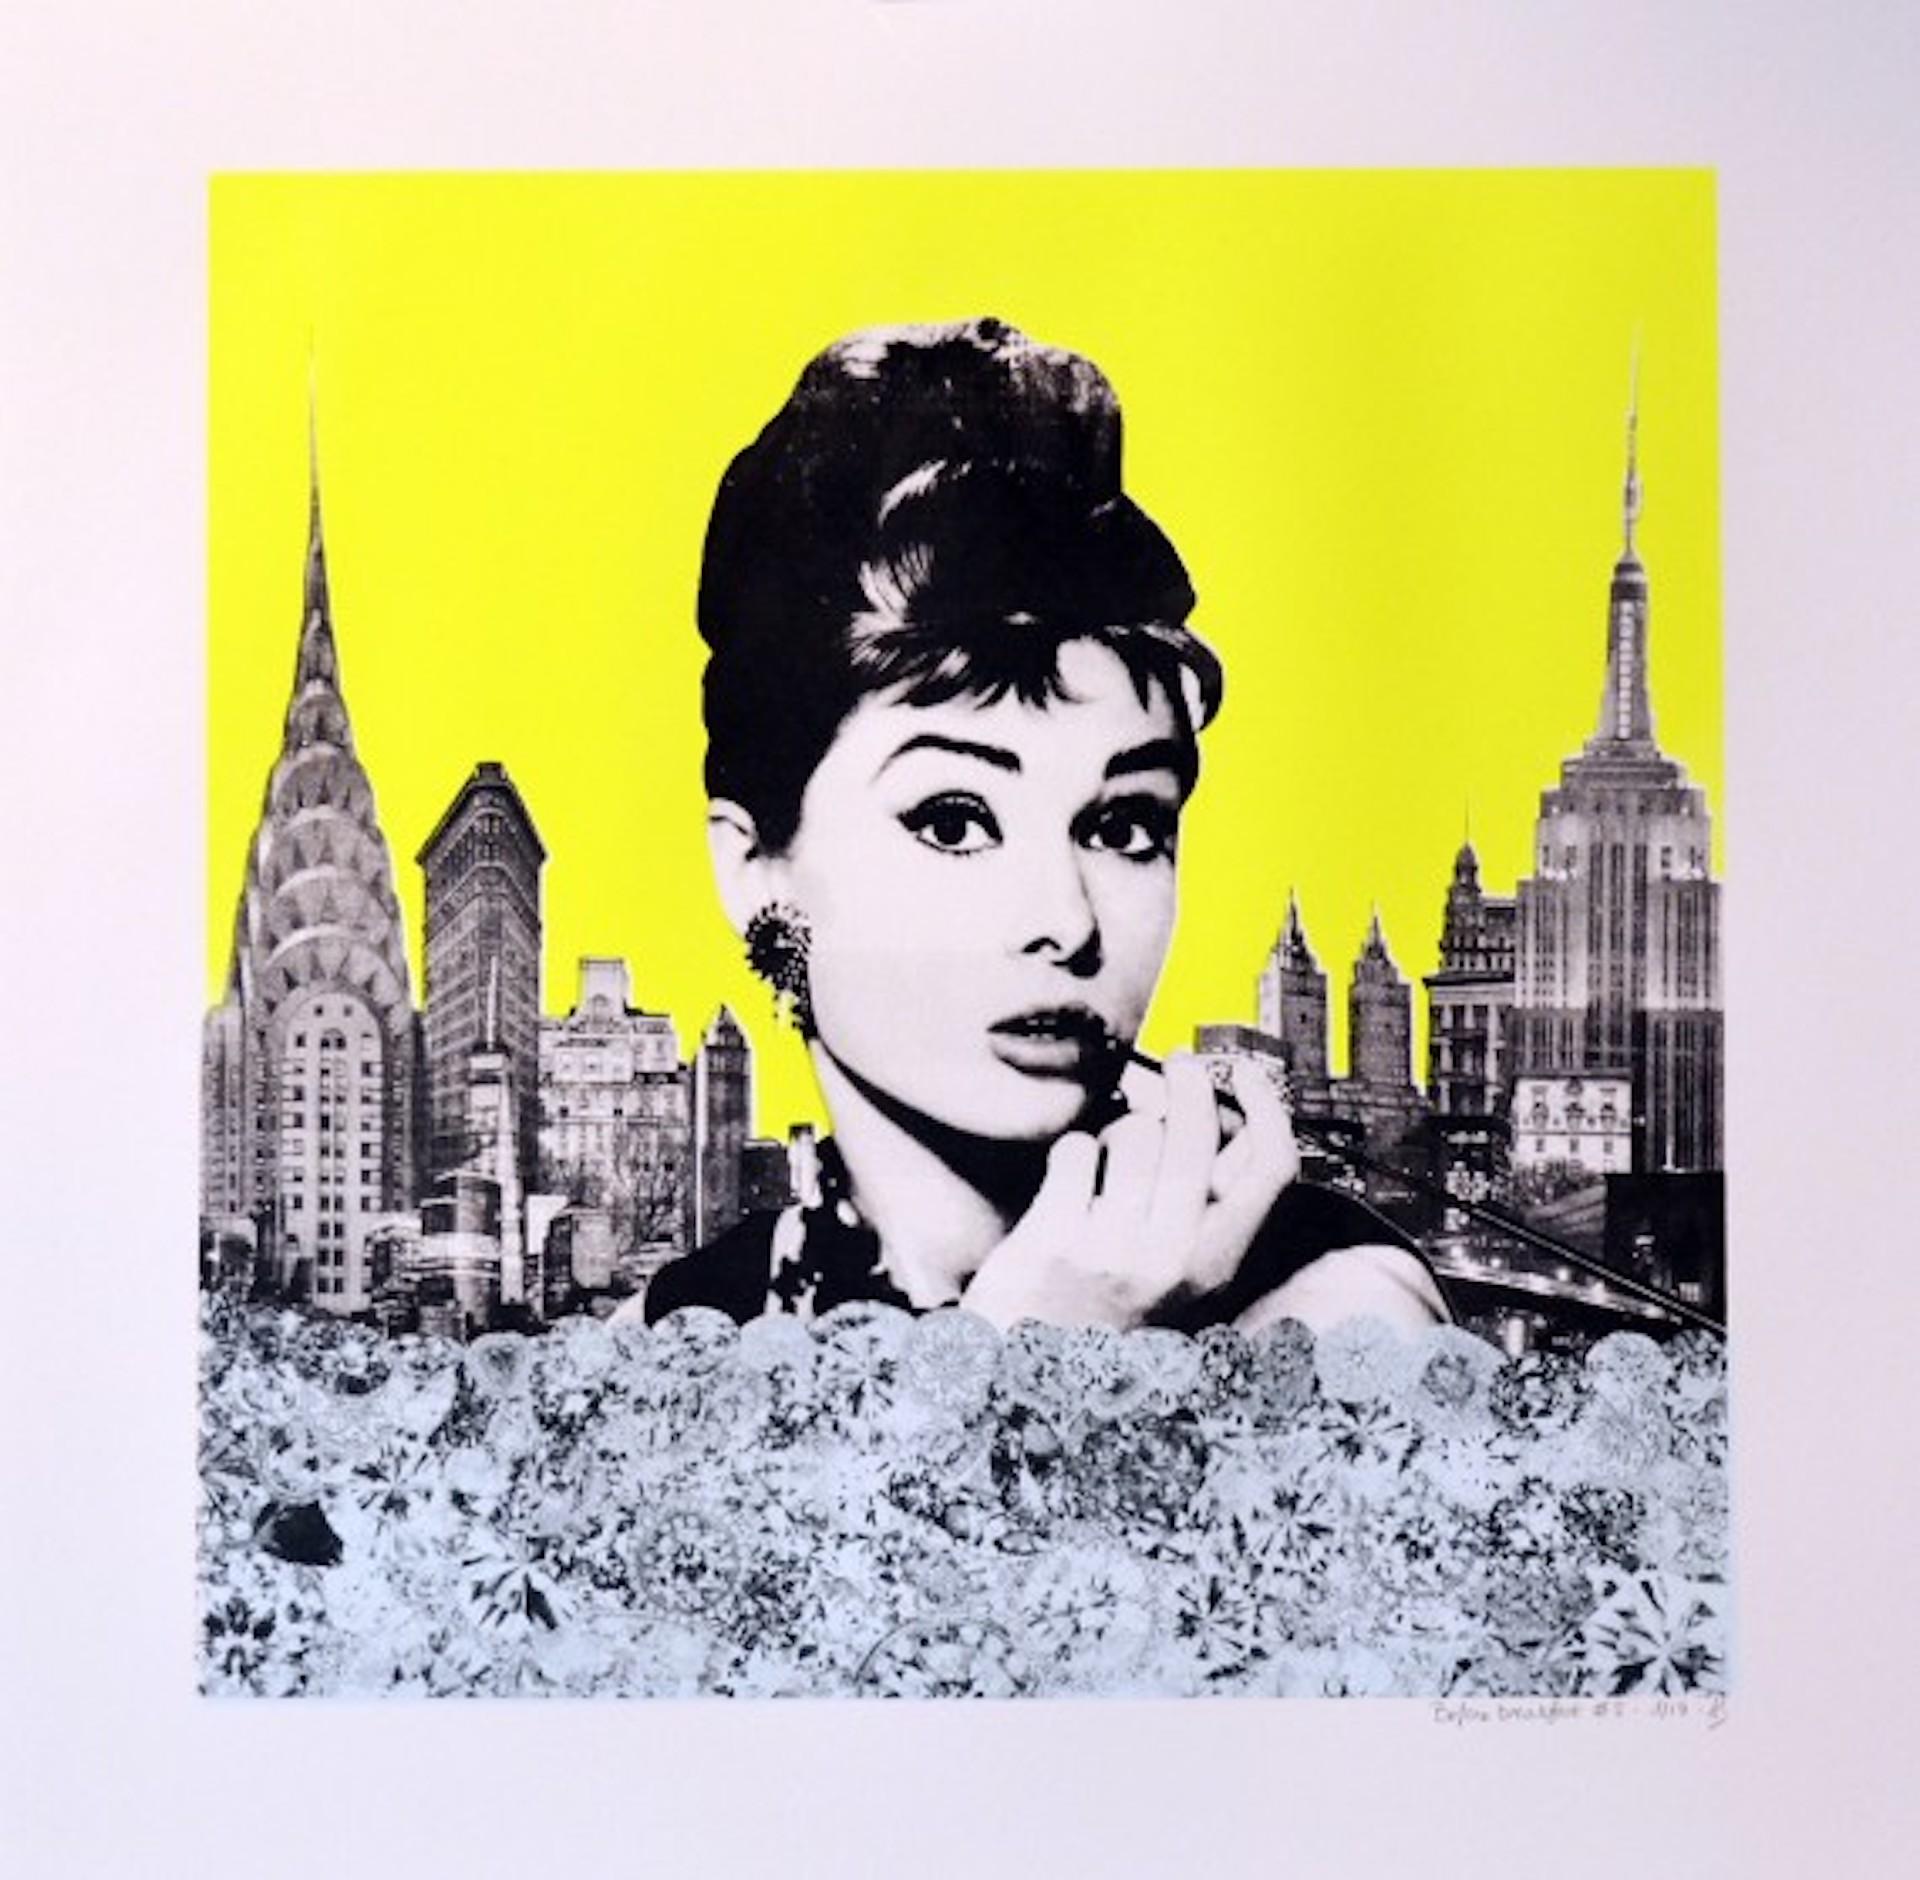 Anne Storno
Before Breakfast
Limited Edition Print
Edition of 17
Image size : 45 X 45 cm
Paper size : 60 X 60 cm
Sold Unframed
Please note that insitu images are purely an indication of how a piece may look.

The iconic Audrey Hepburn is surrounded